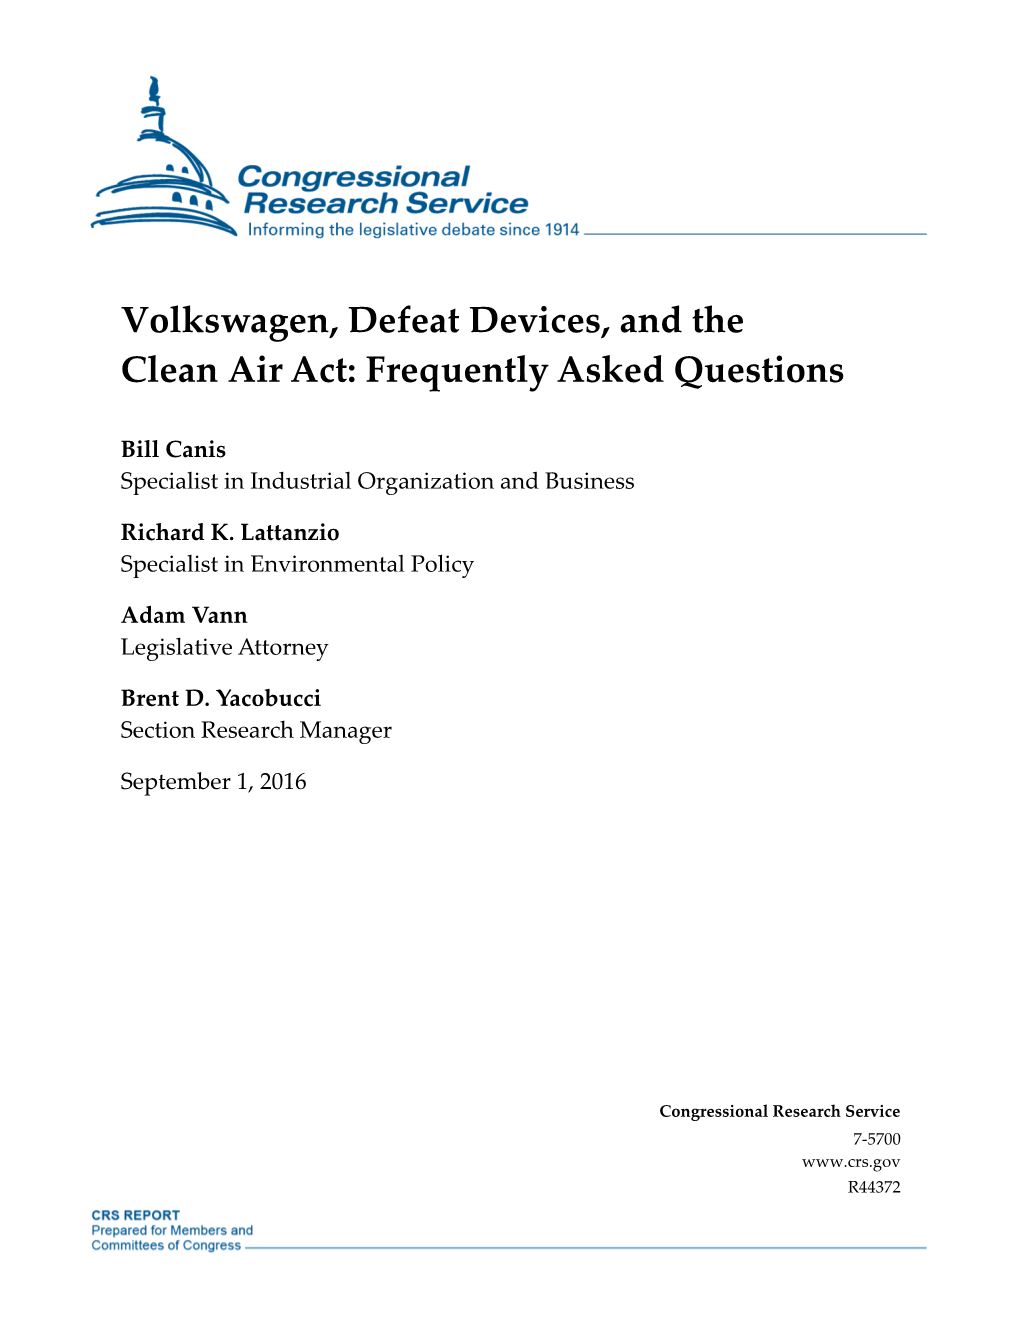 Volkswagen, Defeat Devices, and the Clean Air Act: Frequently Asked Questions